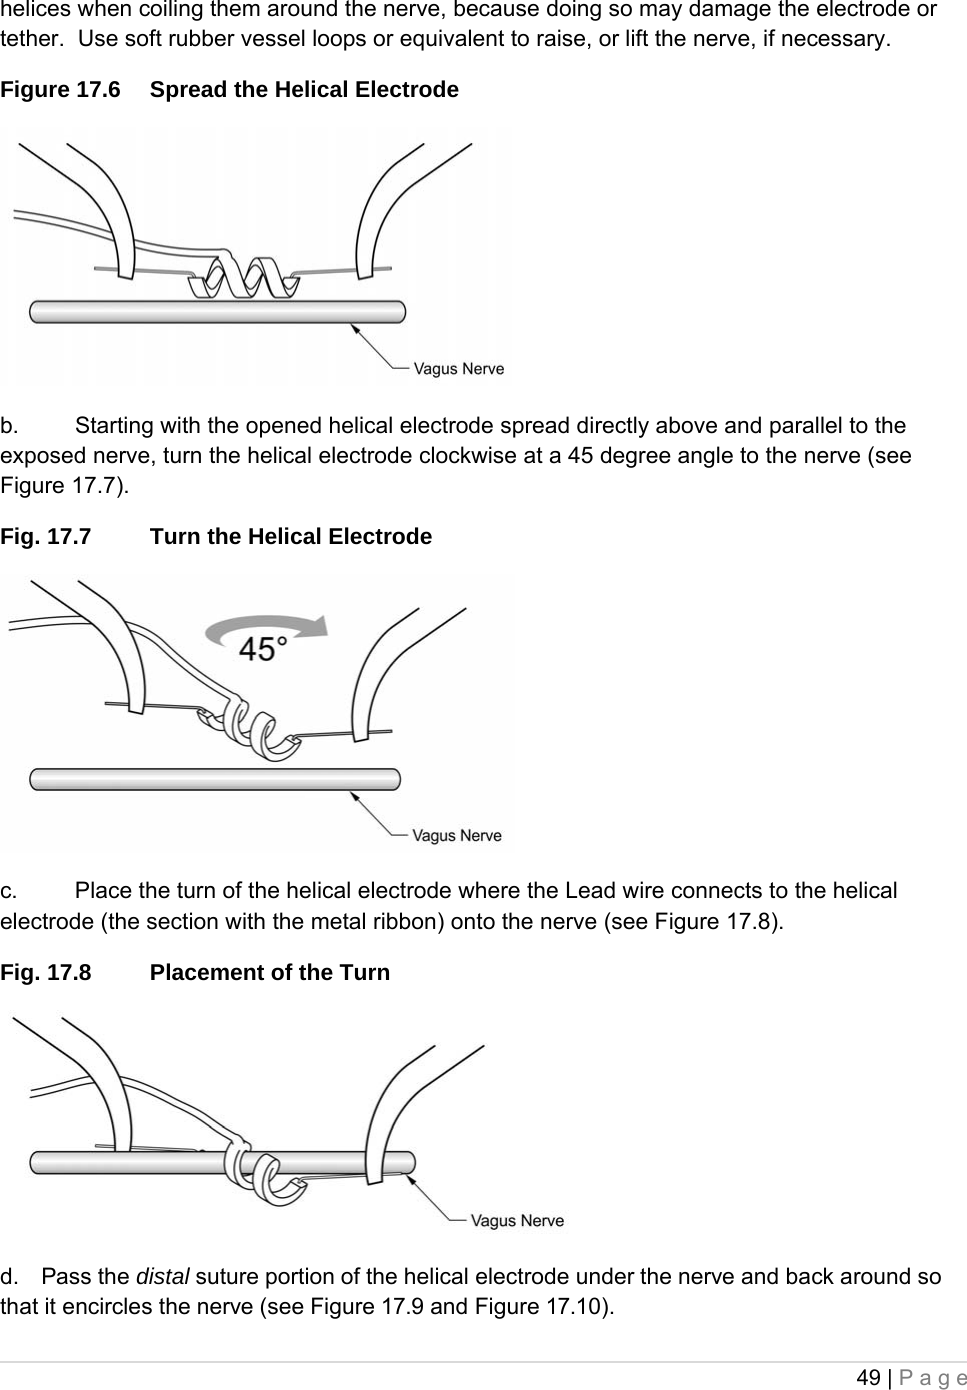 49 | Page  helices when coiling them around the nerve, because doing so may damage the electrode or tether.  Use soft rubber vessel loops or equivalent to raise, or lift the nerve, if necessary. Figure 17.6  Spread the Helical Electrode  b.  Starting with the opened helical electrode spread directly above and parallel to the exposed nerve, turn the helical electrode clockwise at a 45 degree angle to the nerve (see Figure 17.7). Fig. 17.7  Turn the Helical Electrode  c.  Place the turn of the helical electrode where the Lead wire connects to the helical electrode (the section with the metal ribbon) onto the nerve (see Figure 17.8). Fig. 17.8  Placement of the Turn  d.    Pass the distal suture portion of the helical electrode under the nerve and back around so that it encircles the nerve (see Figure 17.9 and Figure 17.10). 